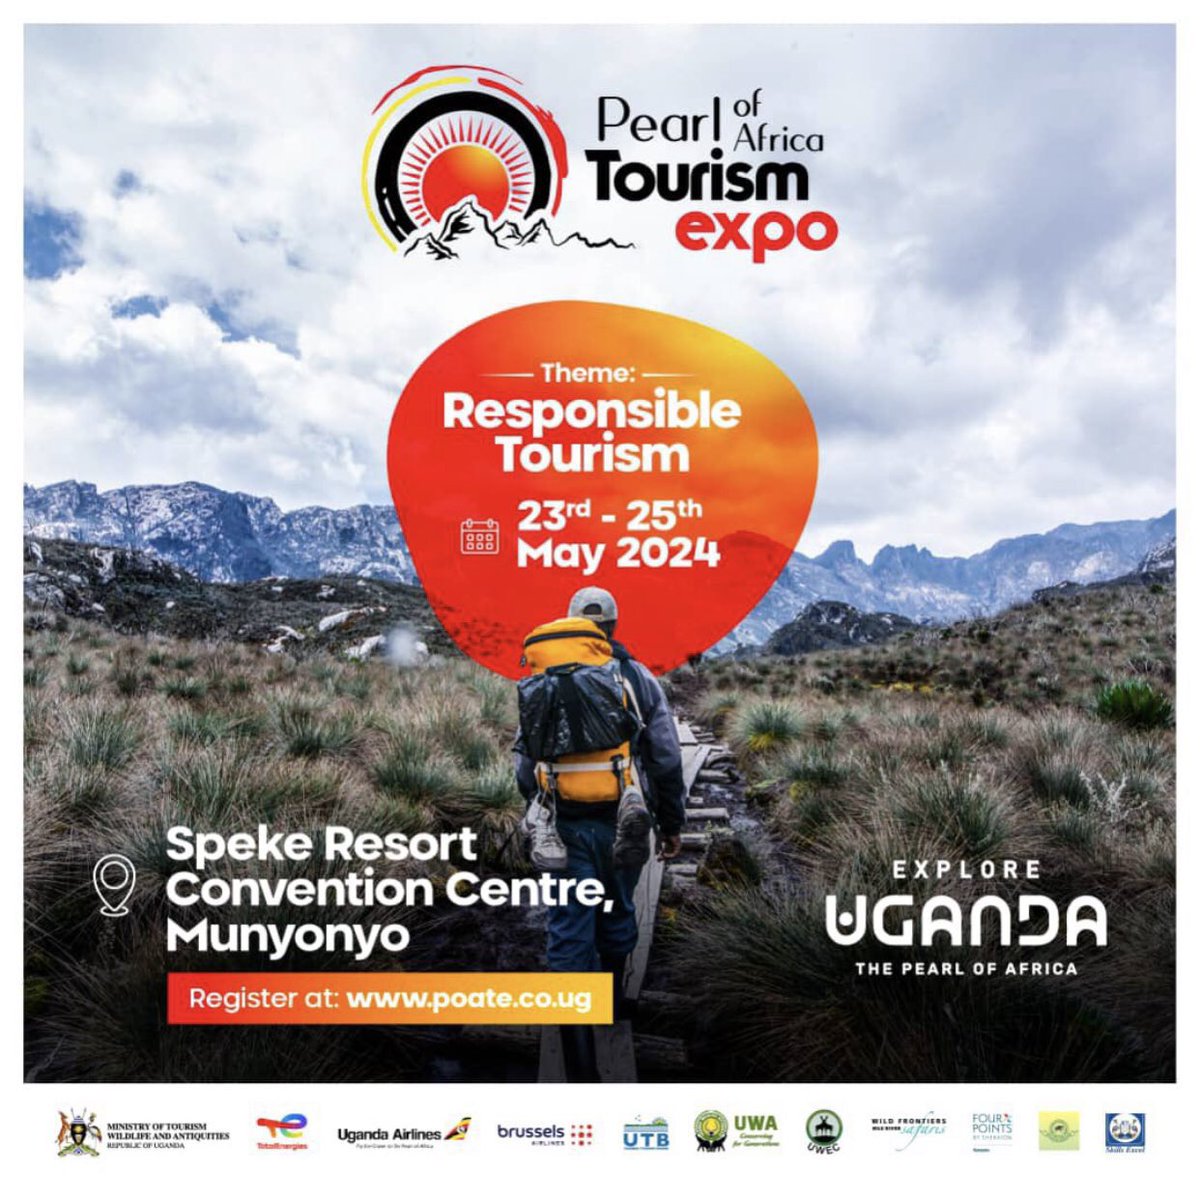 The Pearl of Africa Tourism Expo @pearl_expo is right around the corner.

Come through for a chance to network and learn more about our tourism industry from the 23rd to the 25th of this month.

Entrance fee: 10k ugx per day.

#POATE2024 | #ResponsibleTourism